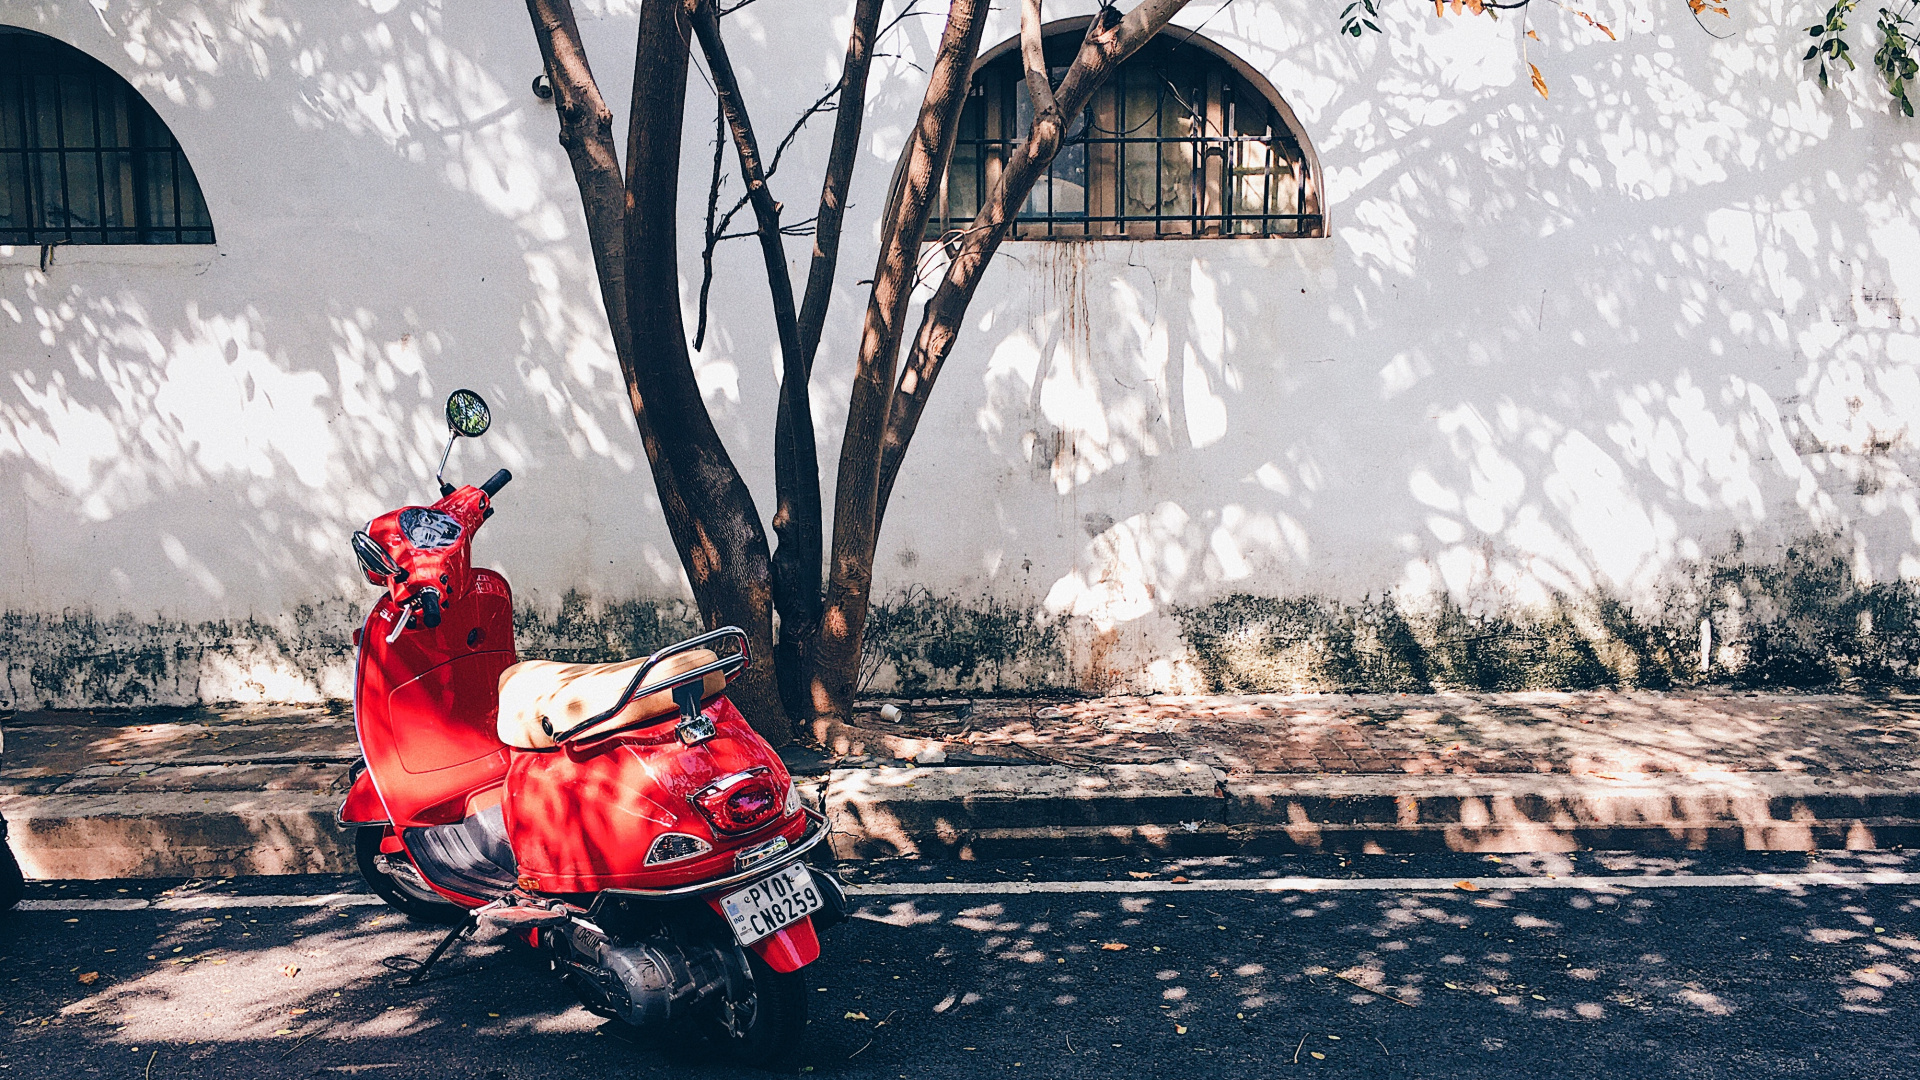 Man in Red Jacket Riding Red Motor Scooter on Road During Daytime. Wallpaper in 1920x1080 Resolution